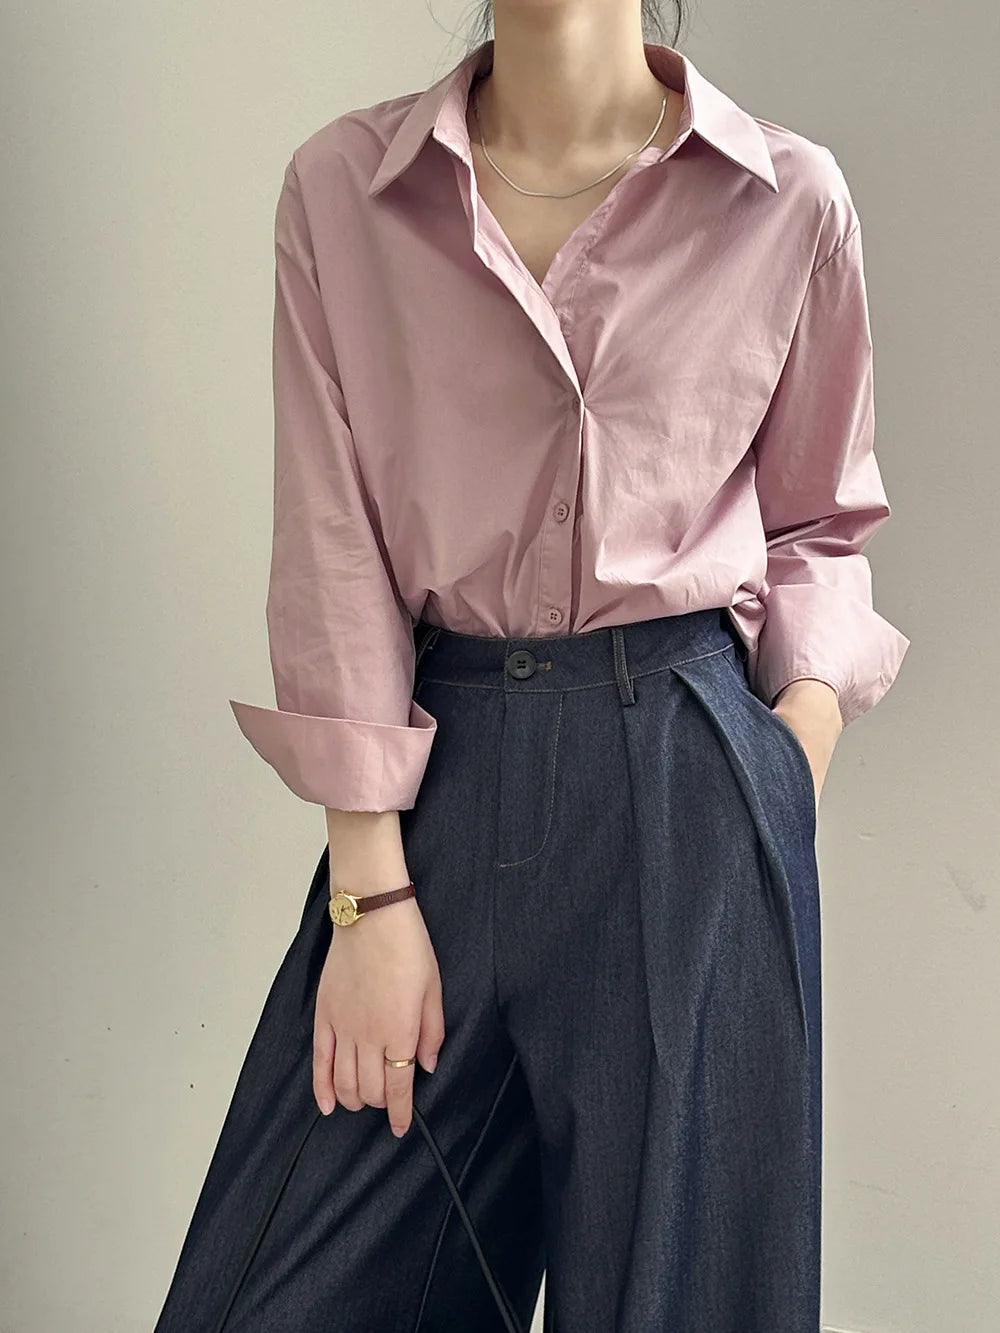 [Korean Style] Loose Fit Solid Color Irregular Button Down Shirt